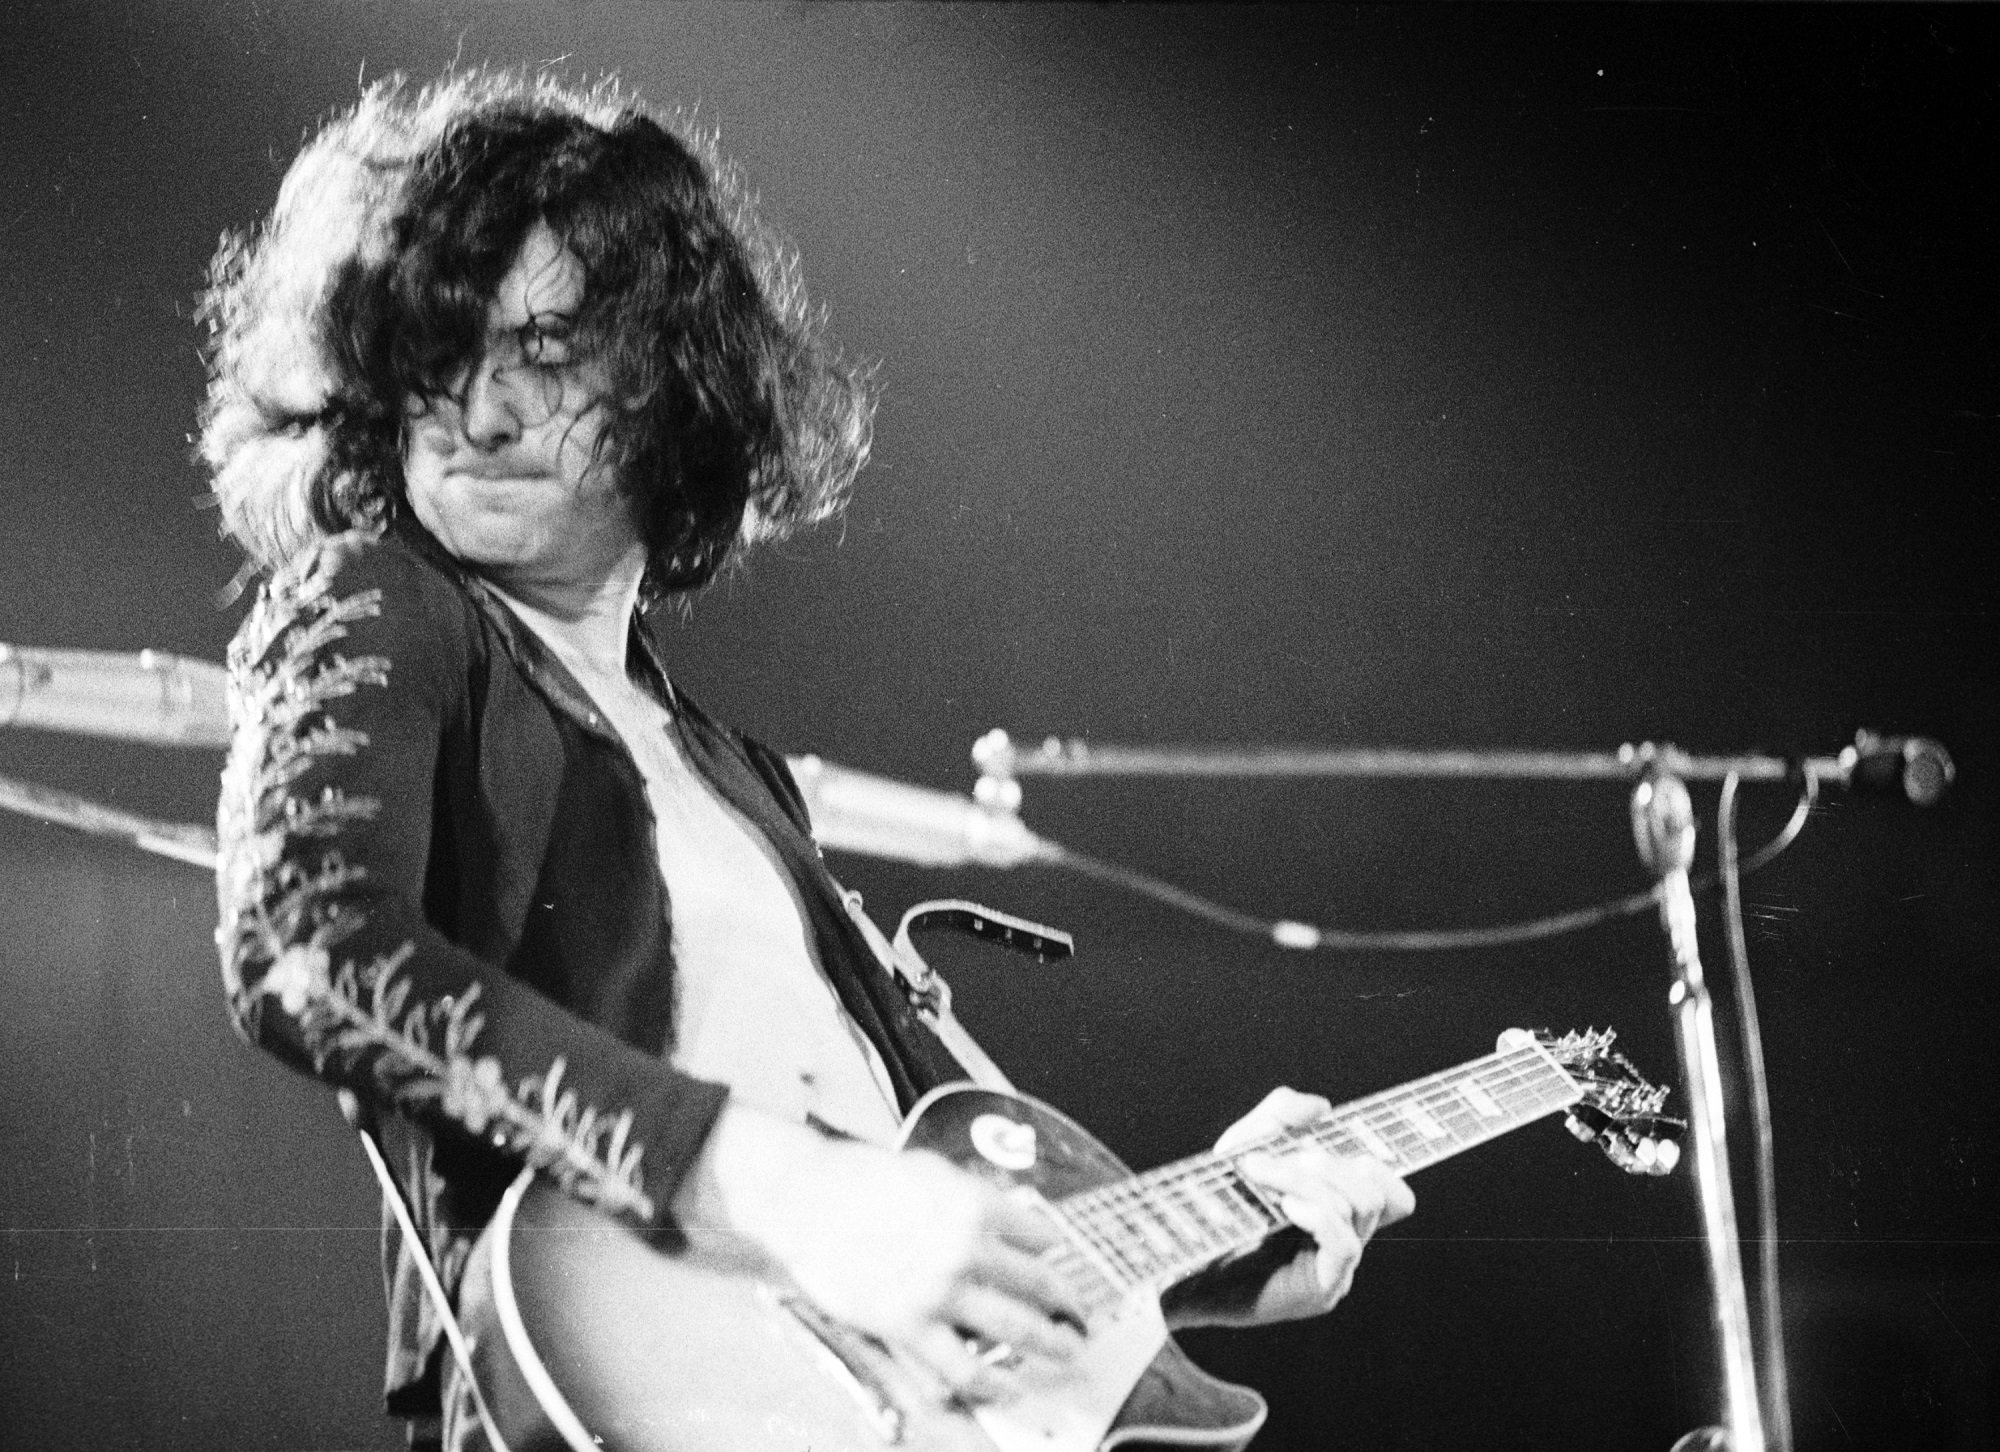 Why Jimmy Page ‘Slept in’ a ‘Cupboard’ After One of Led Zeppelin’s First Gigs